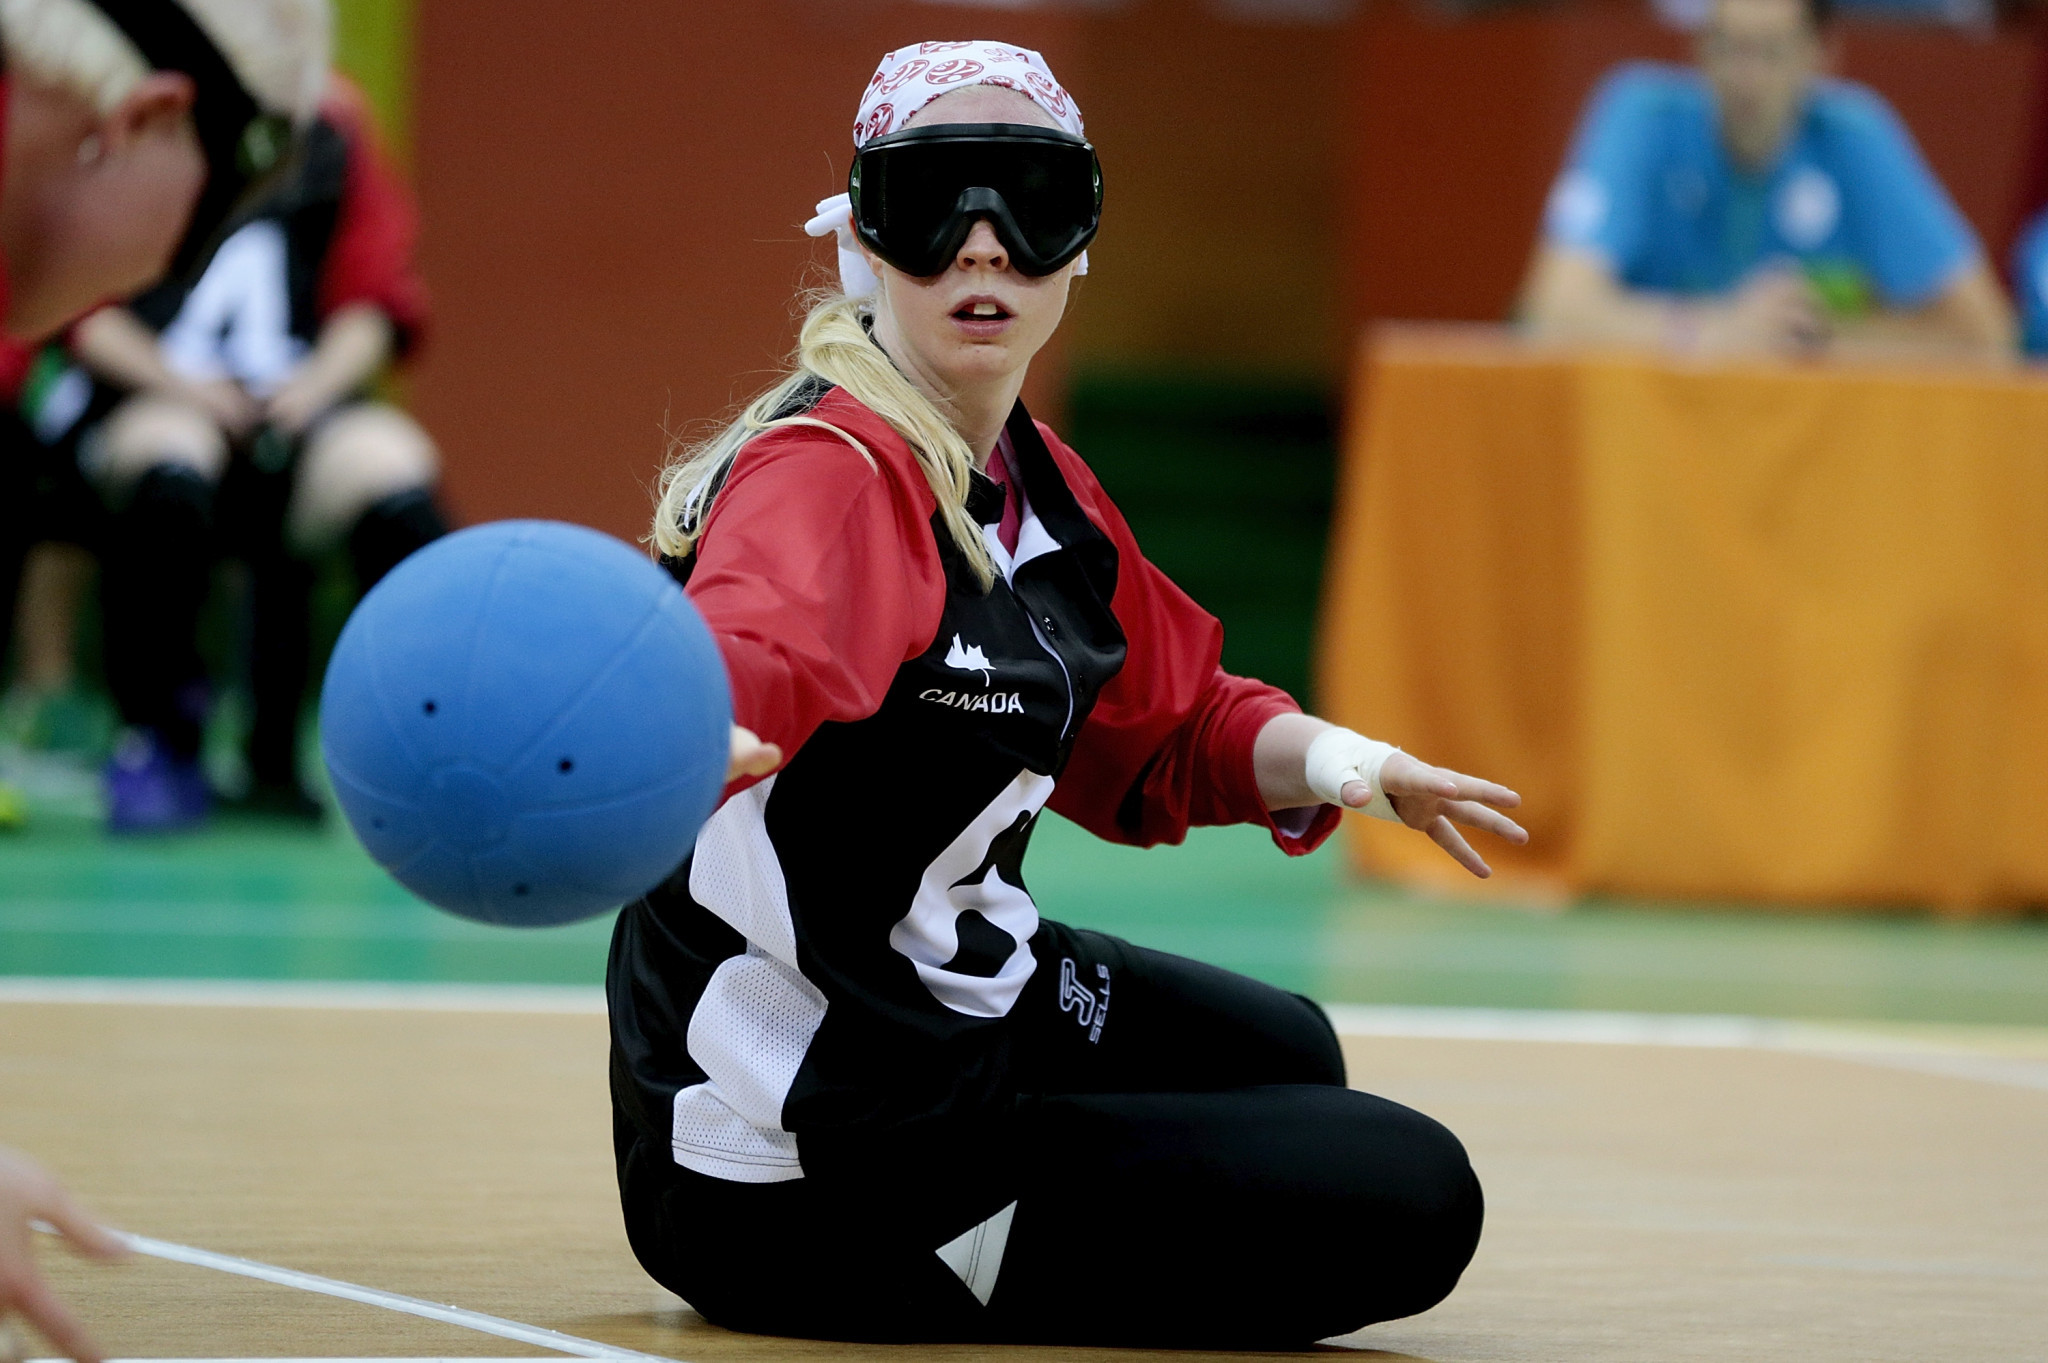 IBSA announce changes to goalball world rankings system